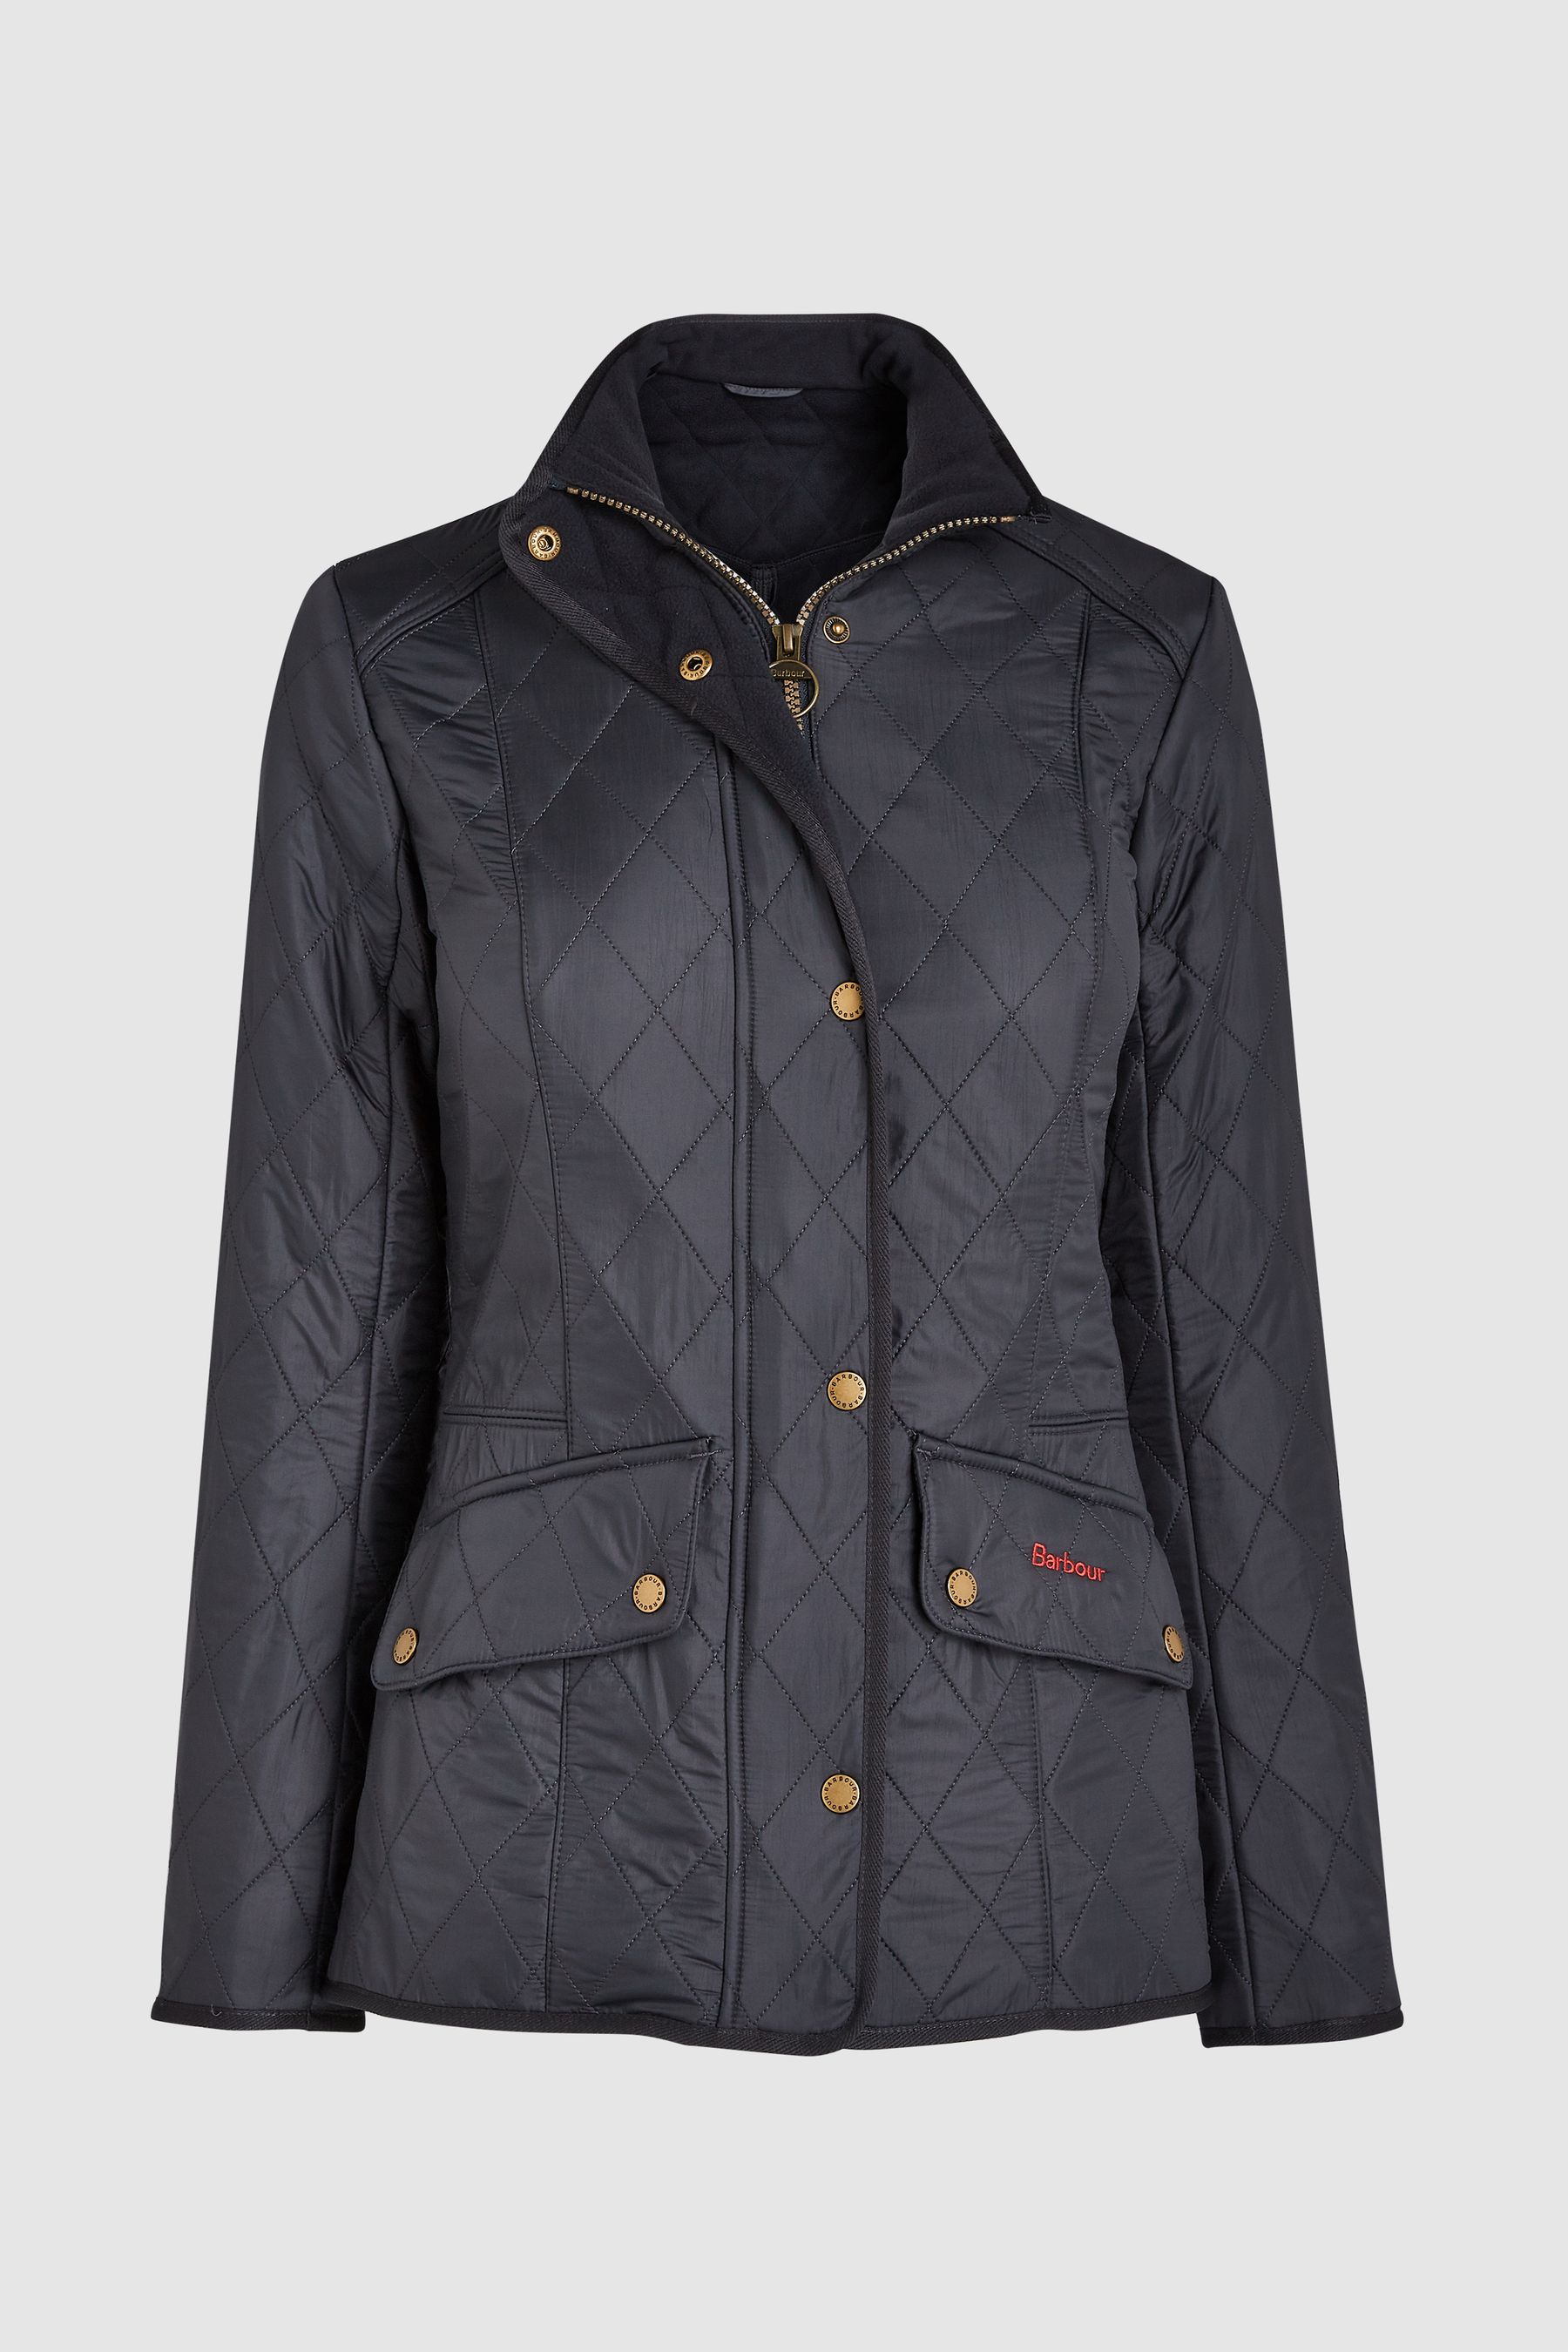 Buy Barbour® Navy Cavalry Quilted Jacket from the Next UK online shop